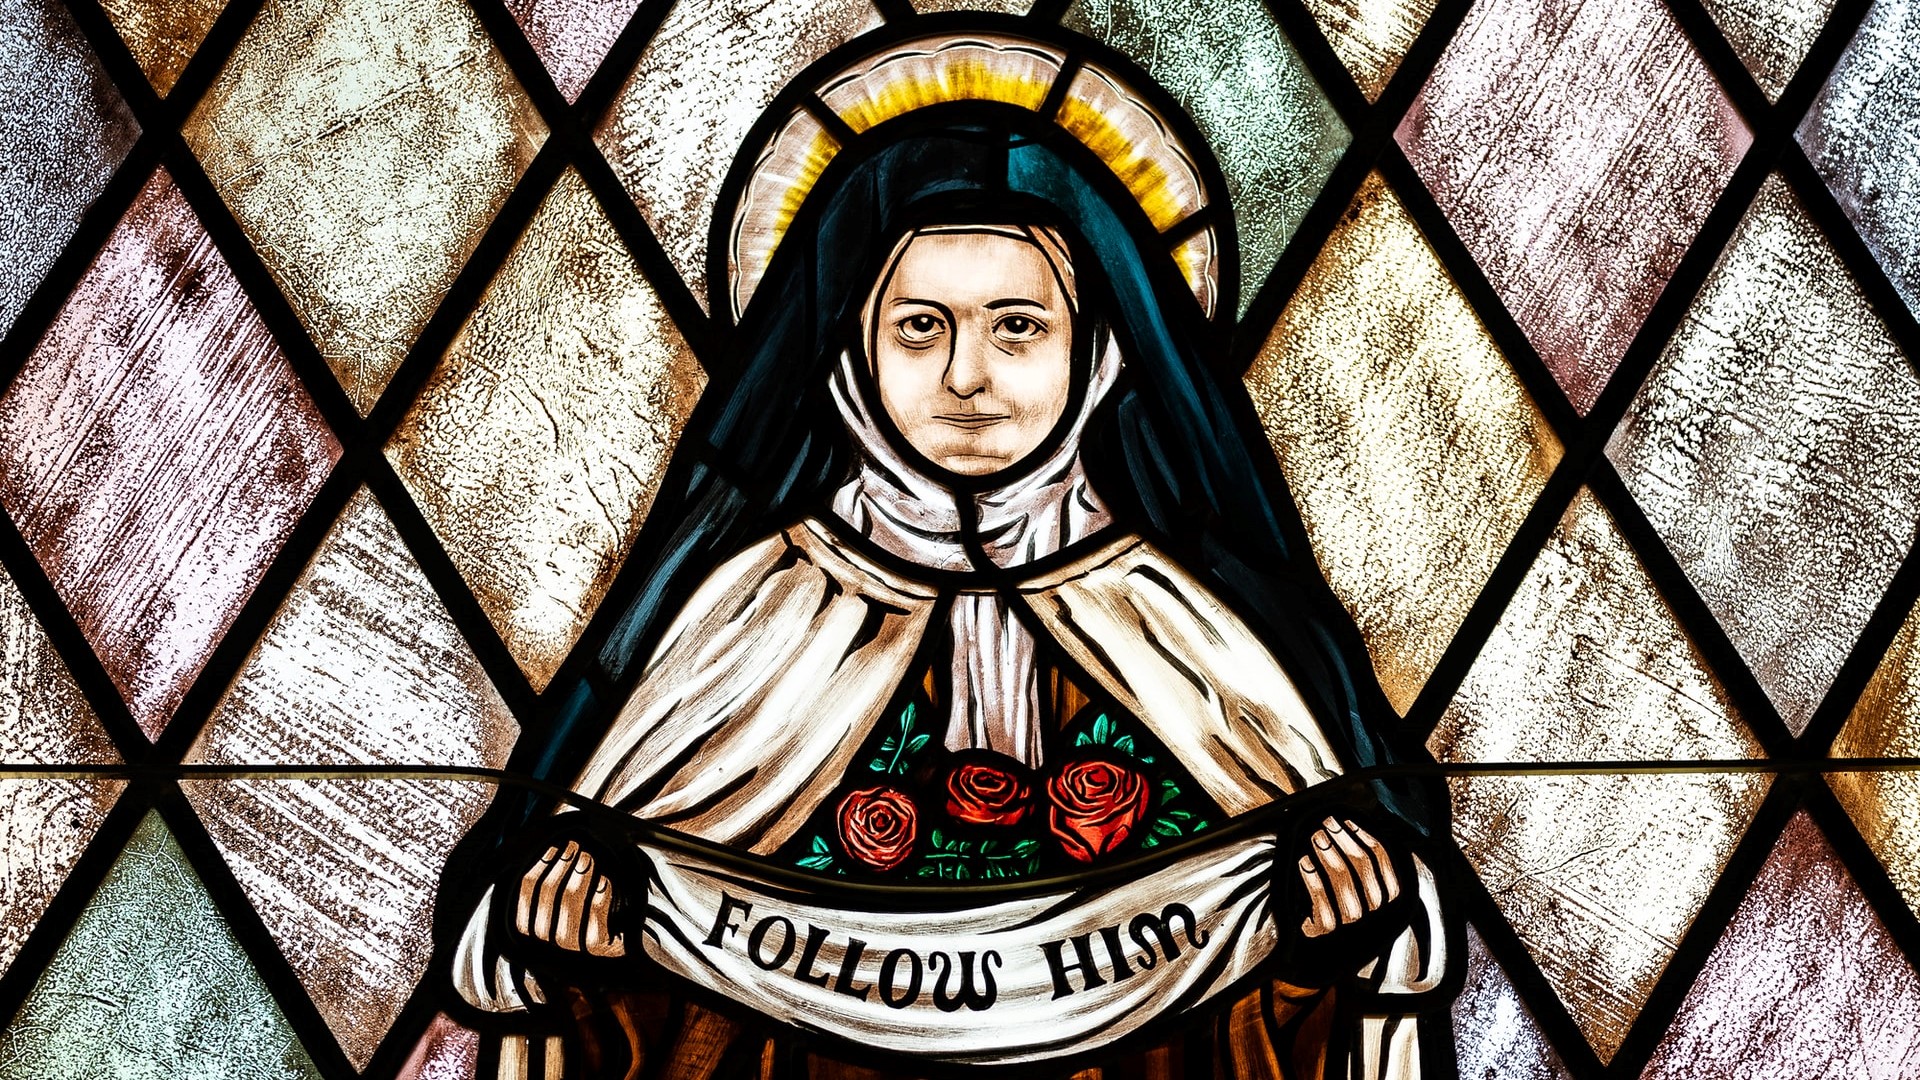 A stained glass image depicting St. Therese of the Child Jesus